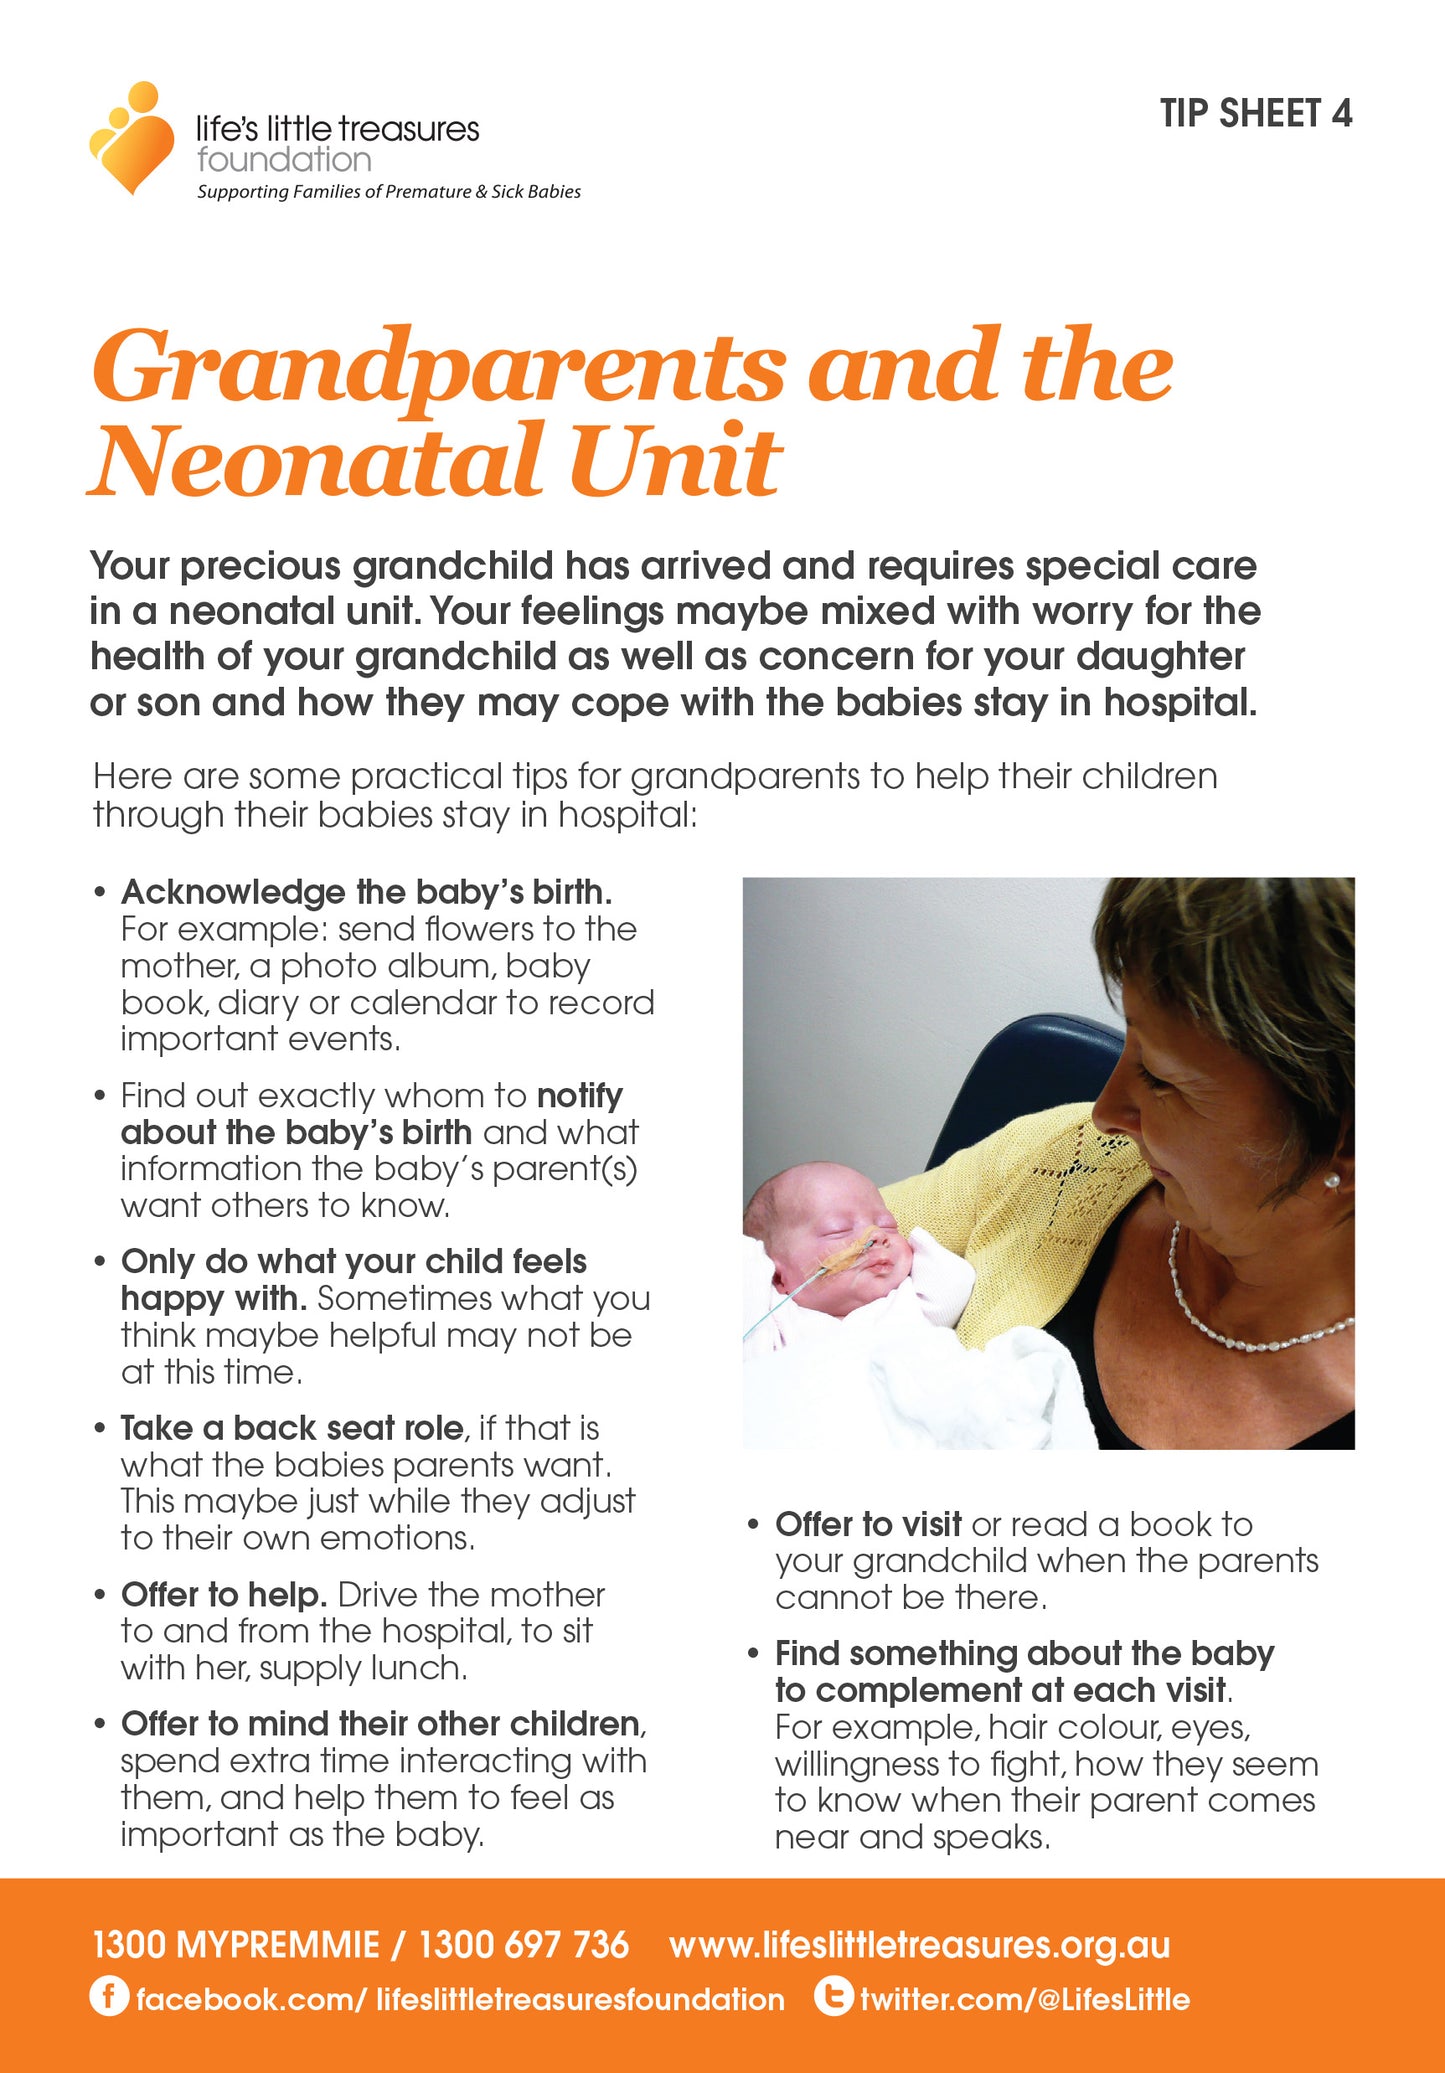 Tip sheet 4 - Grandparents and the Neonatal Unit